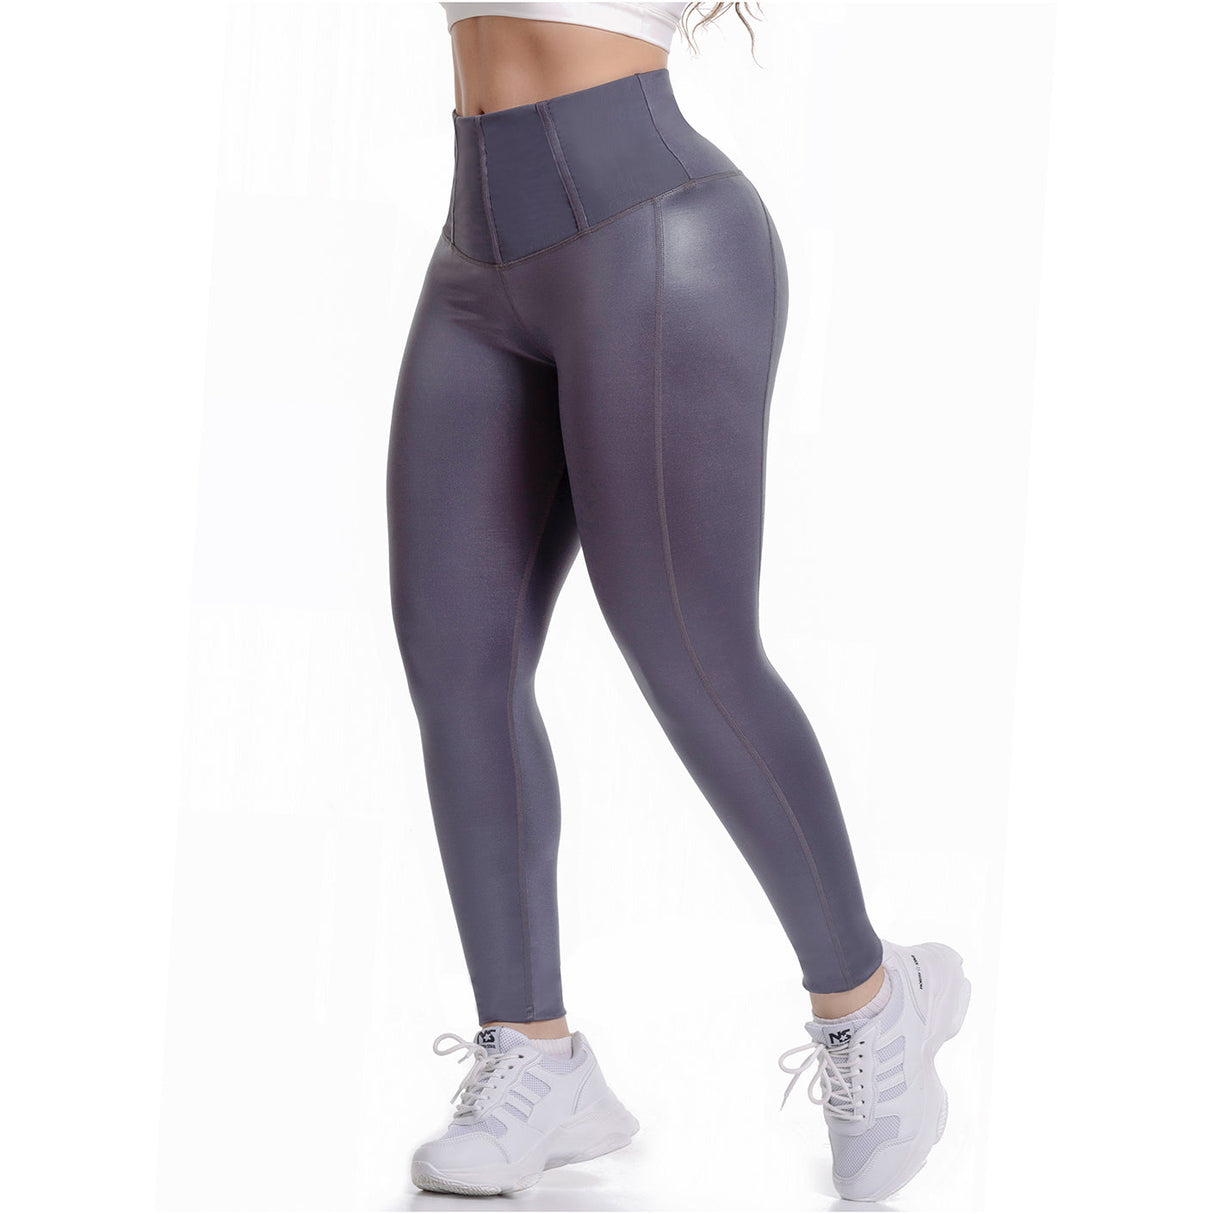 Leggings to shape your belly and buttocks. – Fajas Colombianas Sale